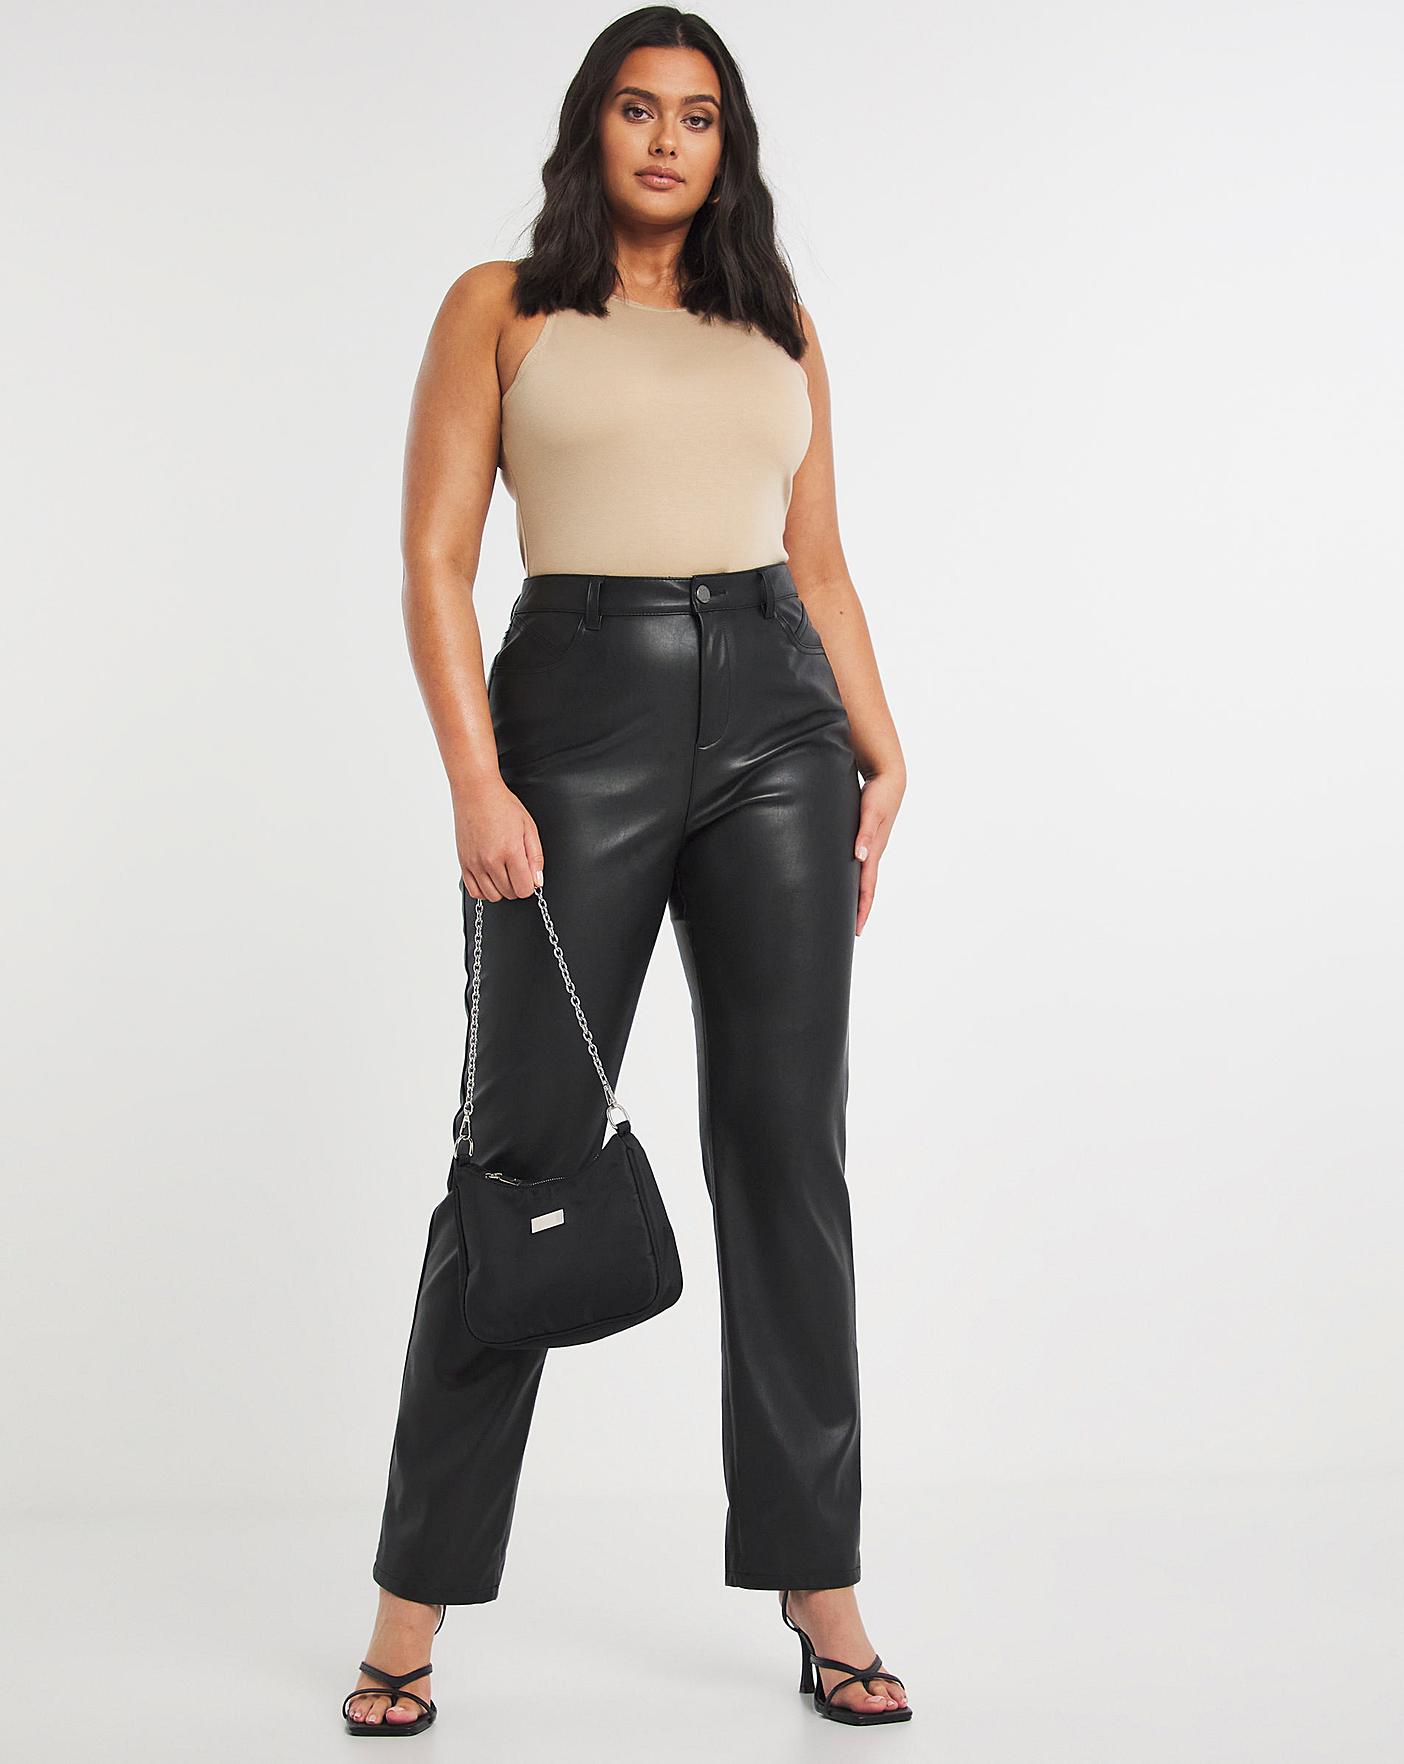 Faux leather trousers in slim fit, length 27.5